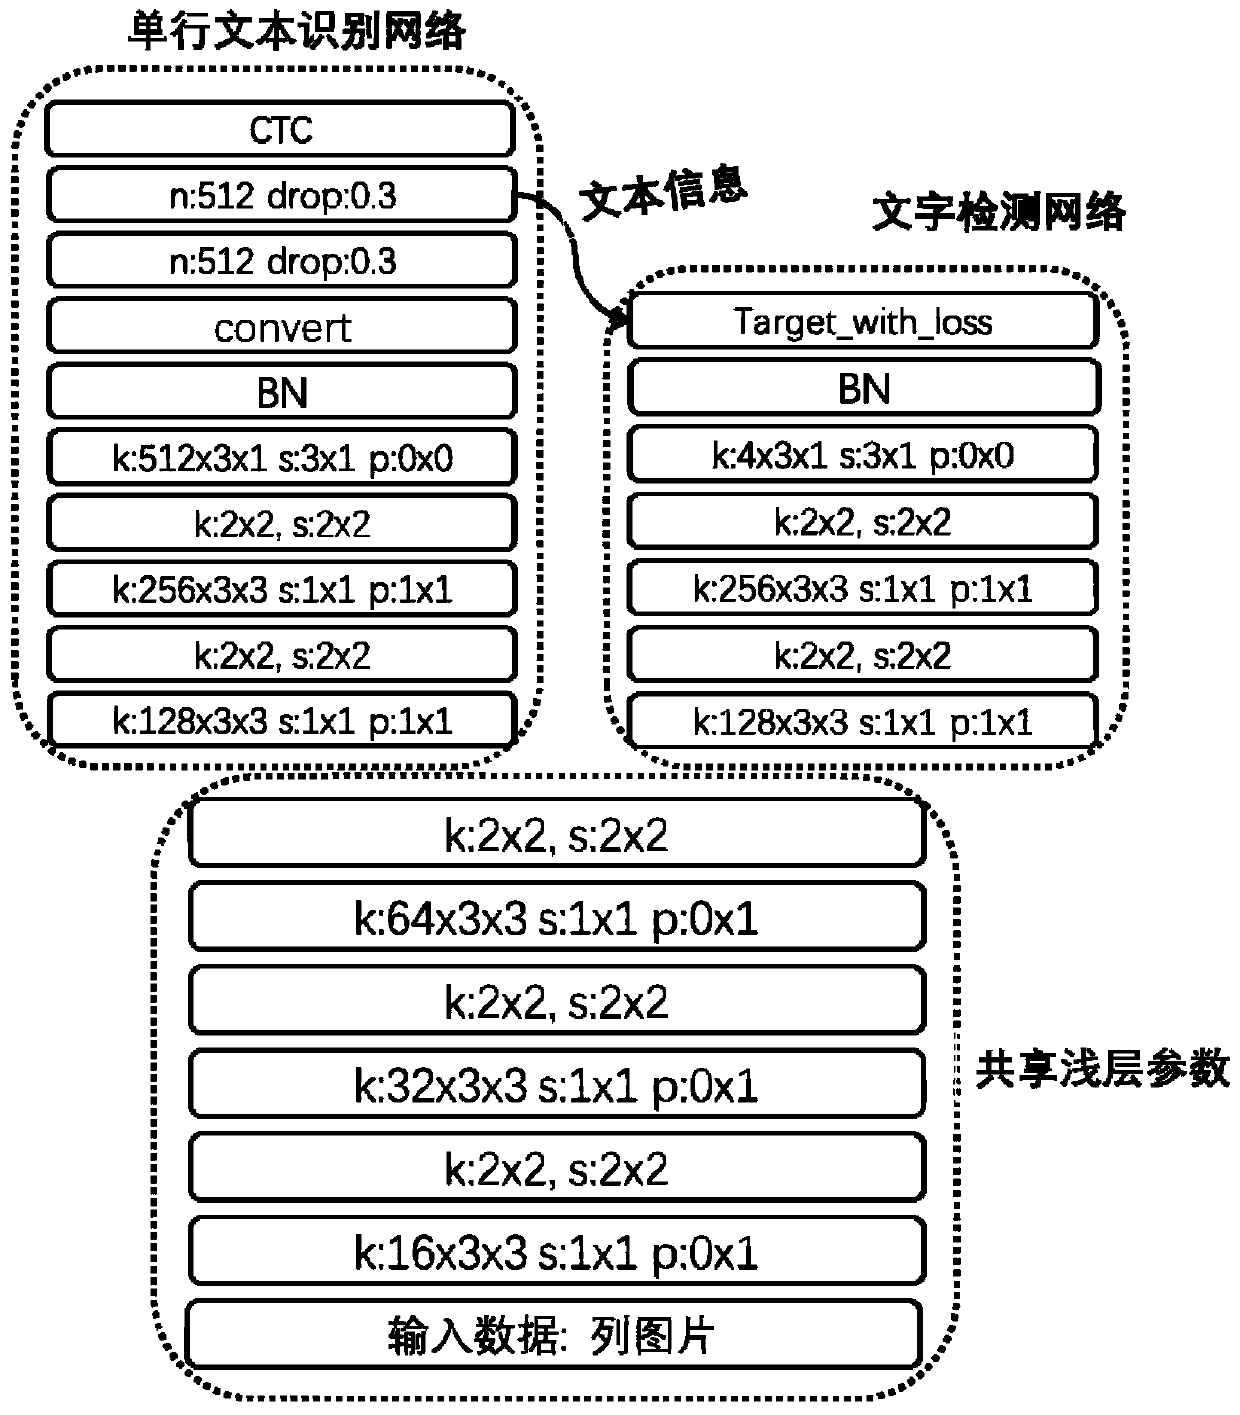 character detection and recognition method for Chinese historical literature dense texts